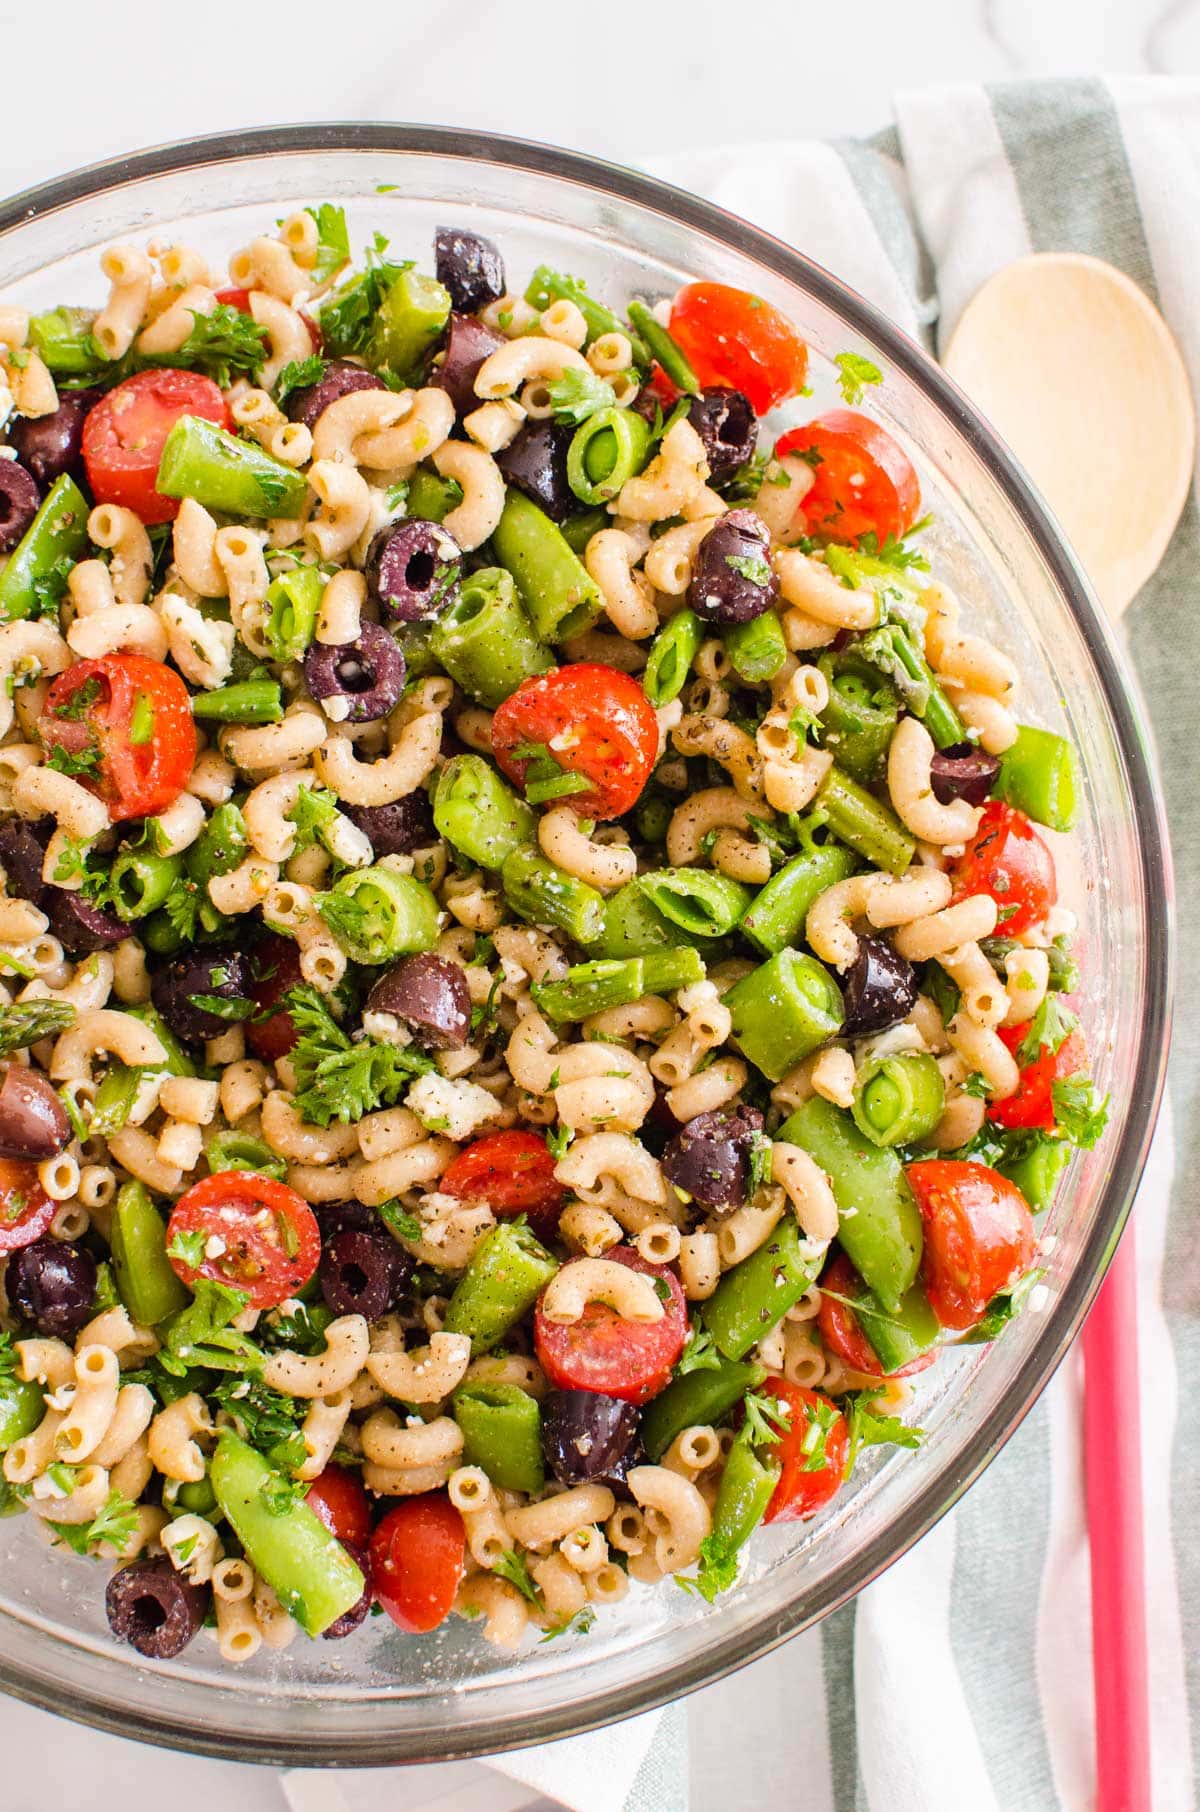 Looking down on a bowl of pasta salad with tomatoes, peas, olives and feta. Linen towel and wooden spoon on a counter.